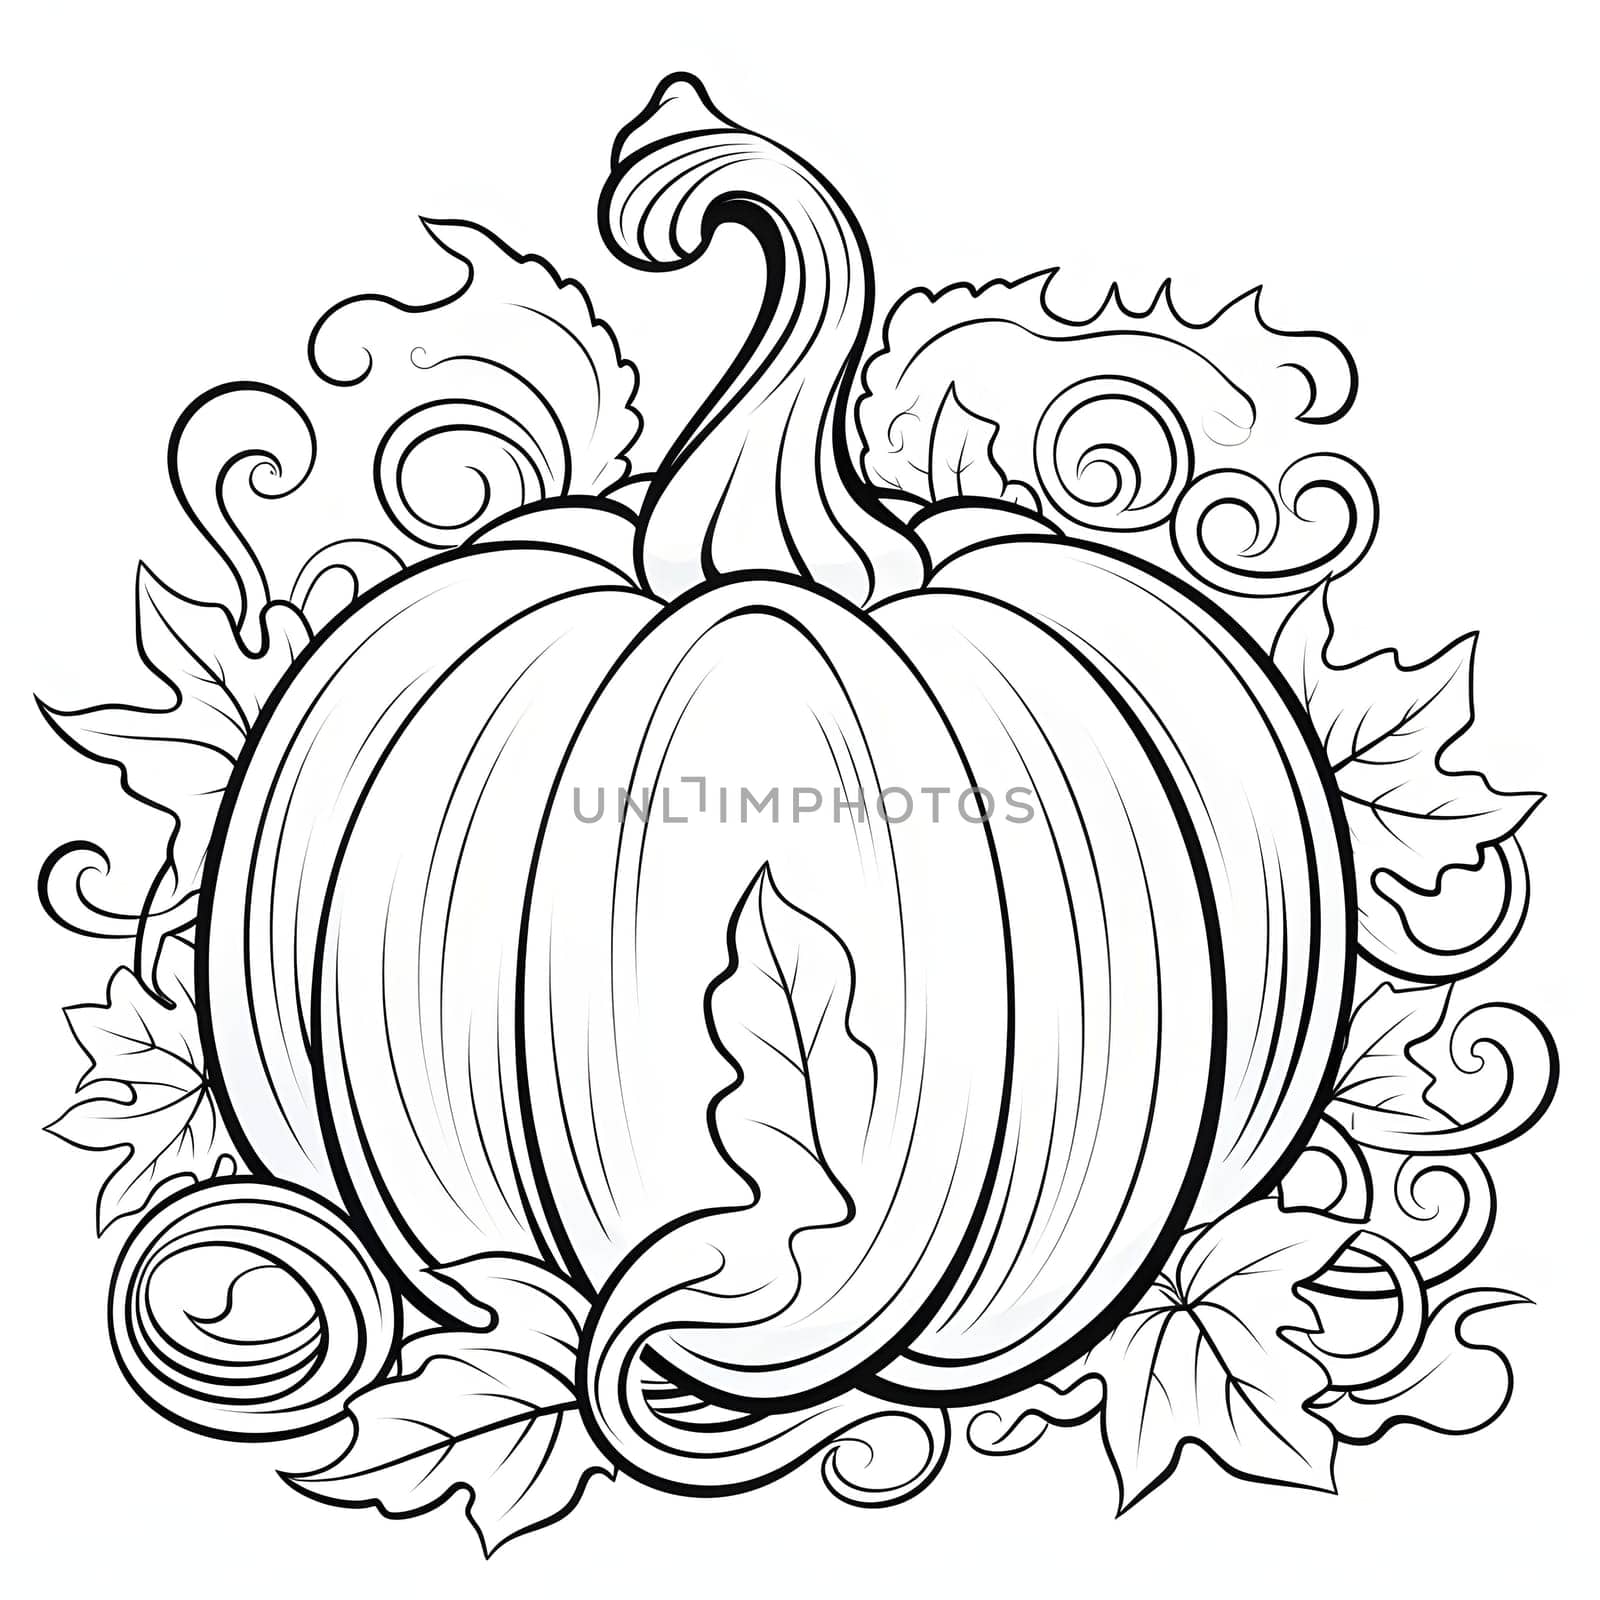 Pumpkin with tiny leaves. Pumpkin as a dish of thanksgiving for the harvest, picture on a white isolated background. Atmosphere of joy and celebration.